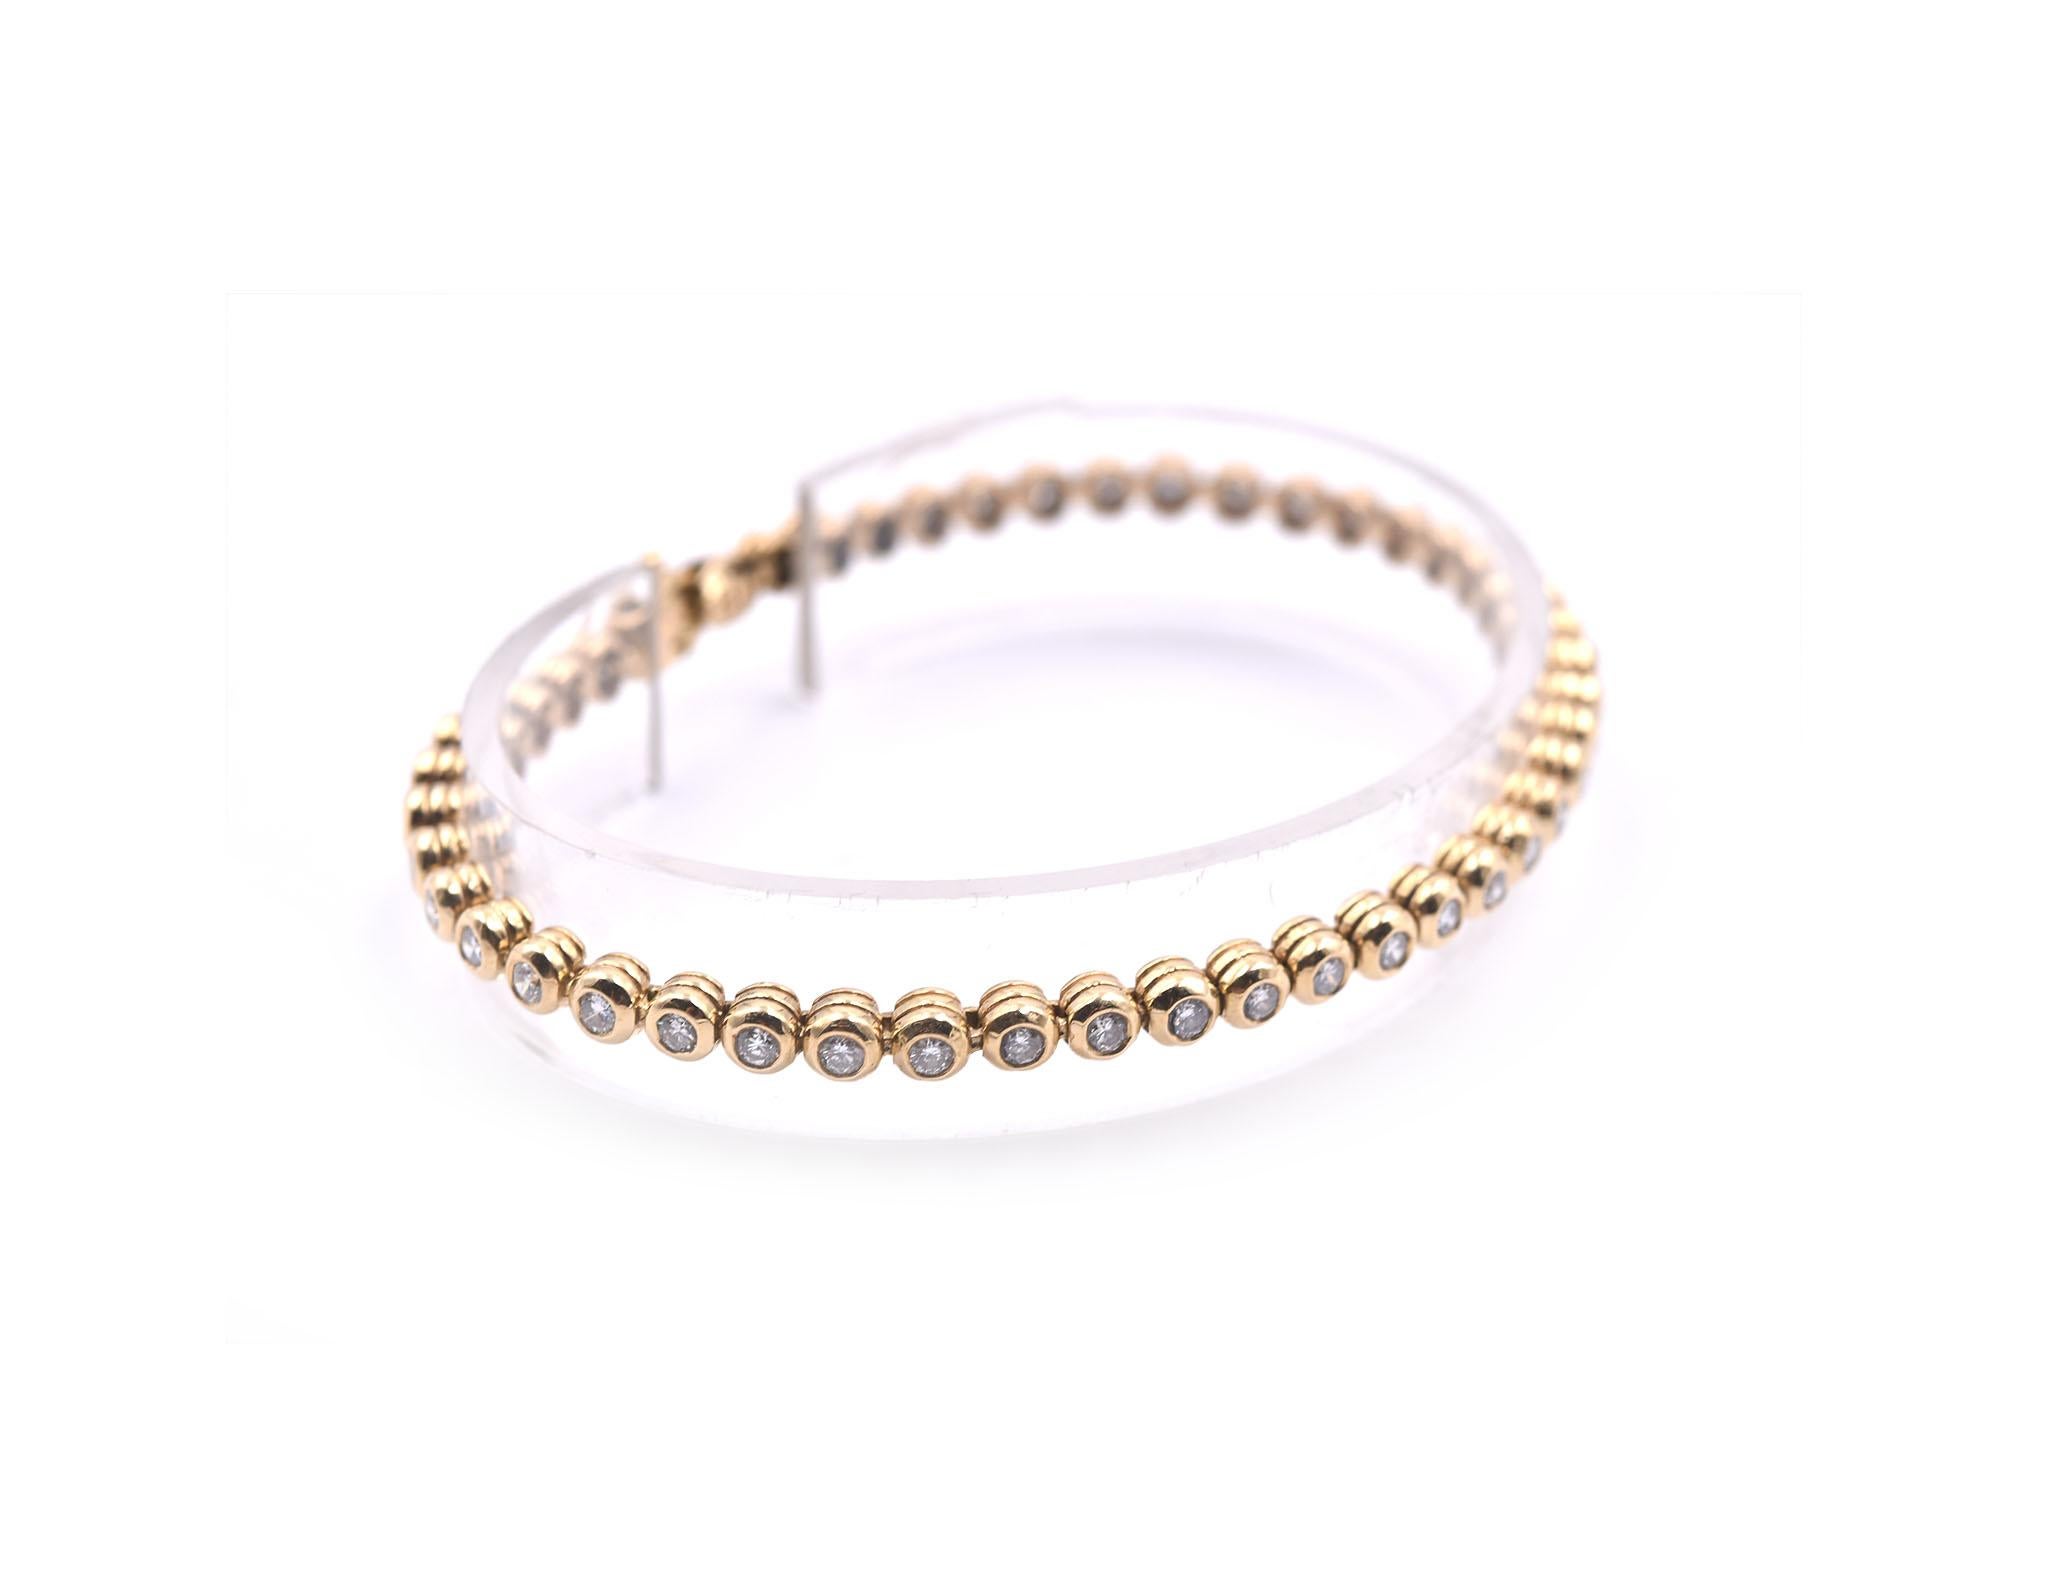 Designer: custom design
Material: 14k yellow gold
Diamonds: 40 round brilliant cut = 1.84cttw
Color: G
Clarity: VS
Dimensions: bracelet is 7-inch long and it is 4mm wide
Weight: 15.87 grams